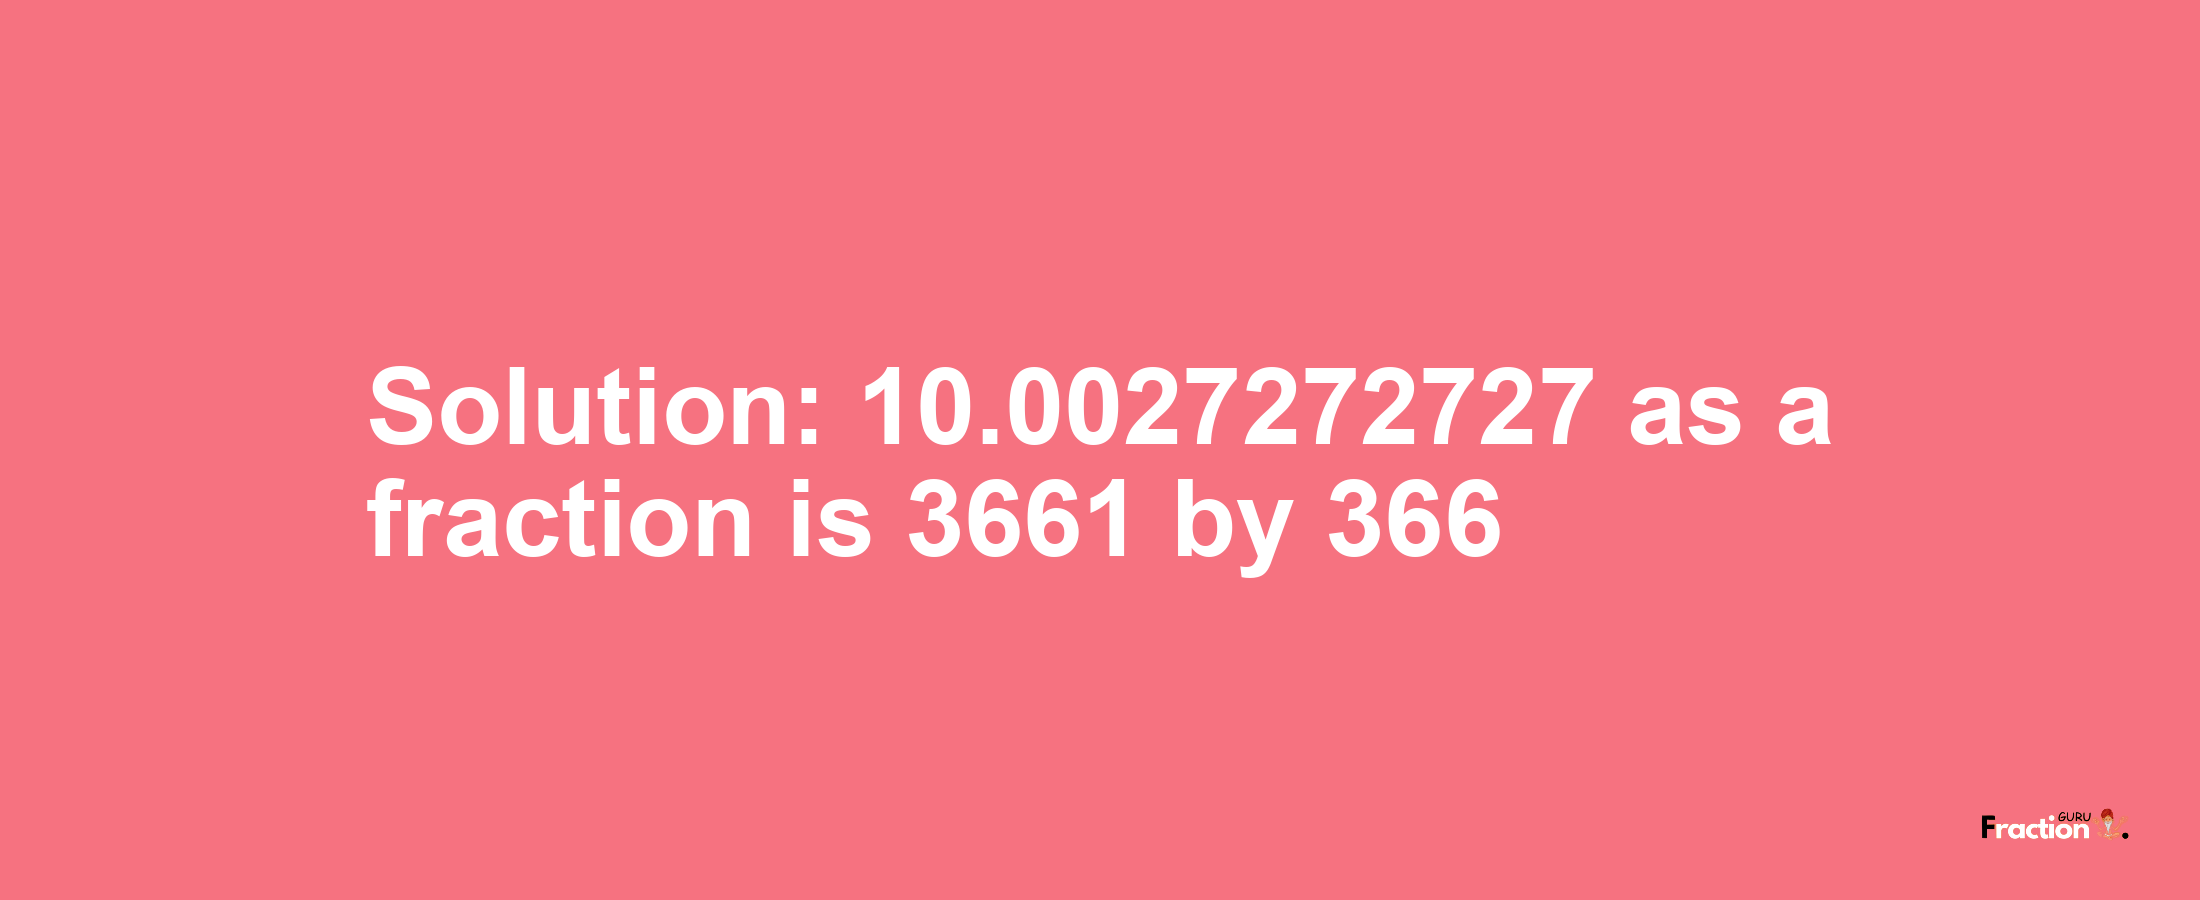 Solution:10.0027272727 as a fraction is 3661/366